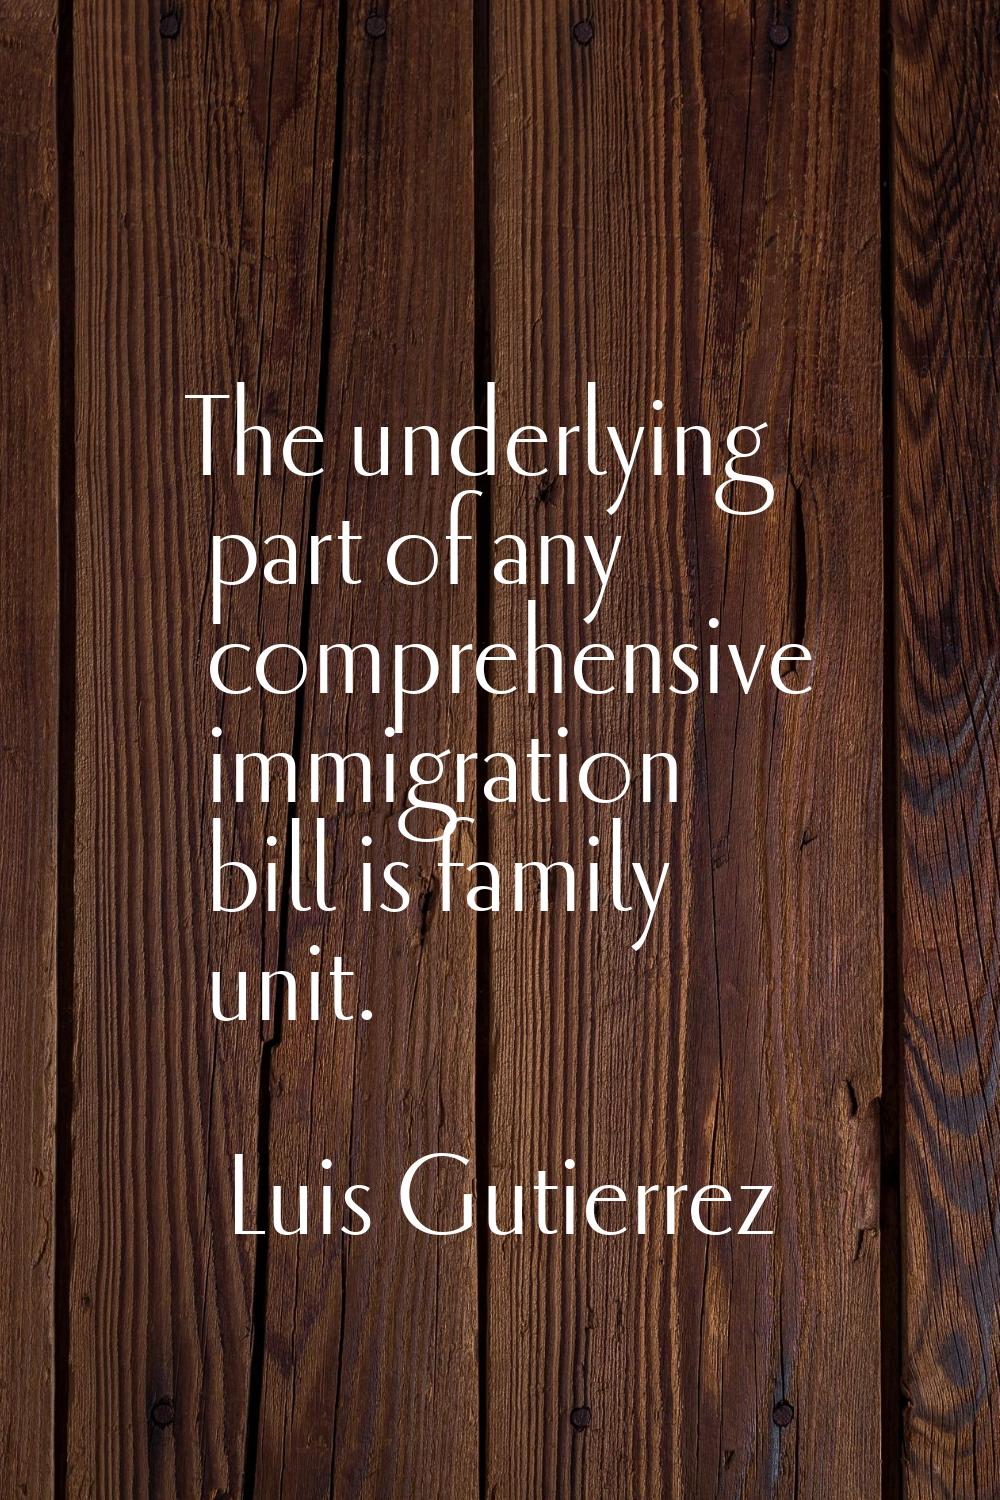 The underlying part of any comprehensive immigration bill is family unit.